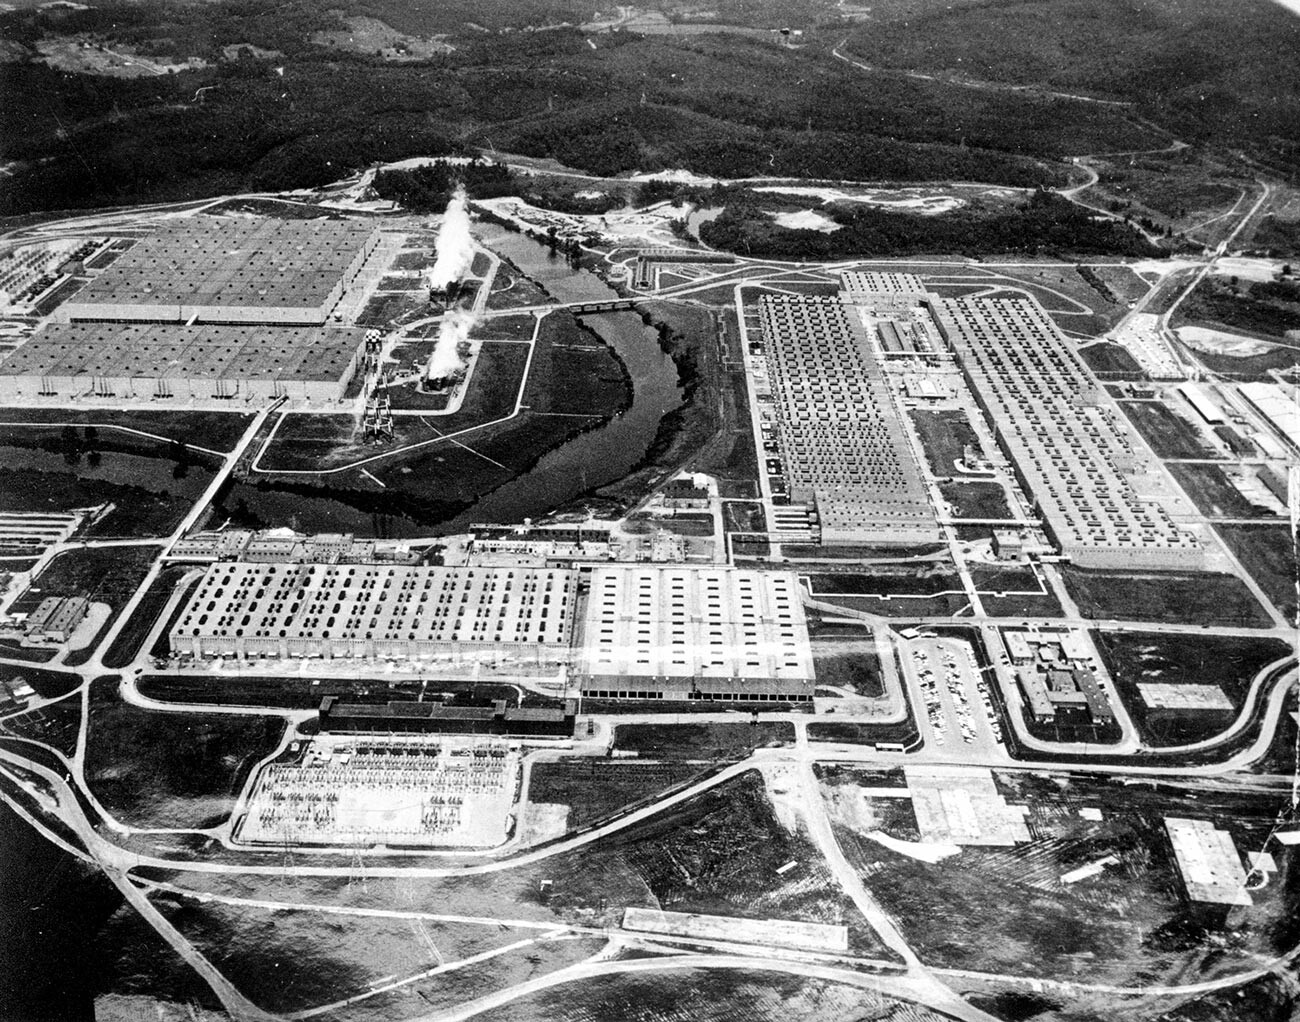 This is an aerial view of the Atomic Energy Commission's nuclear research facility at Oak Ridge Tenn.